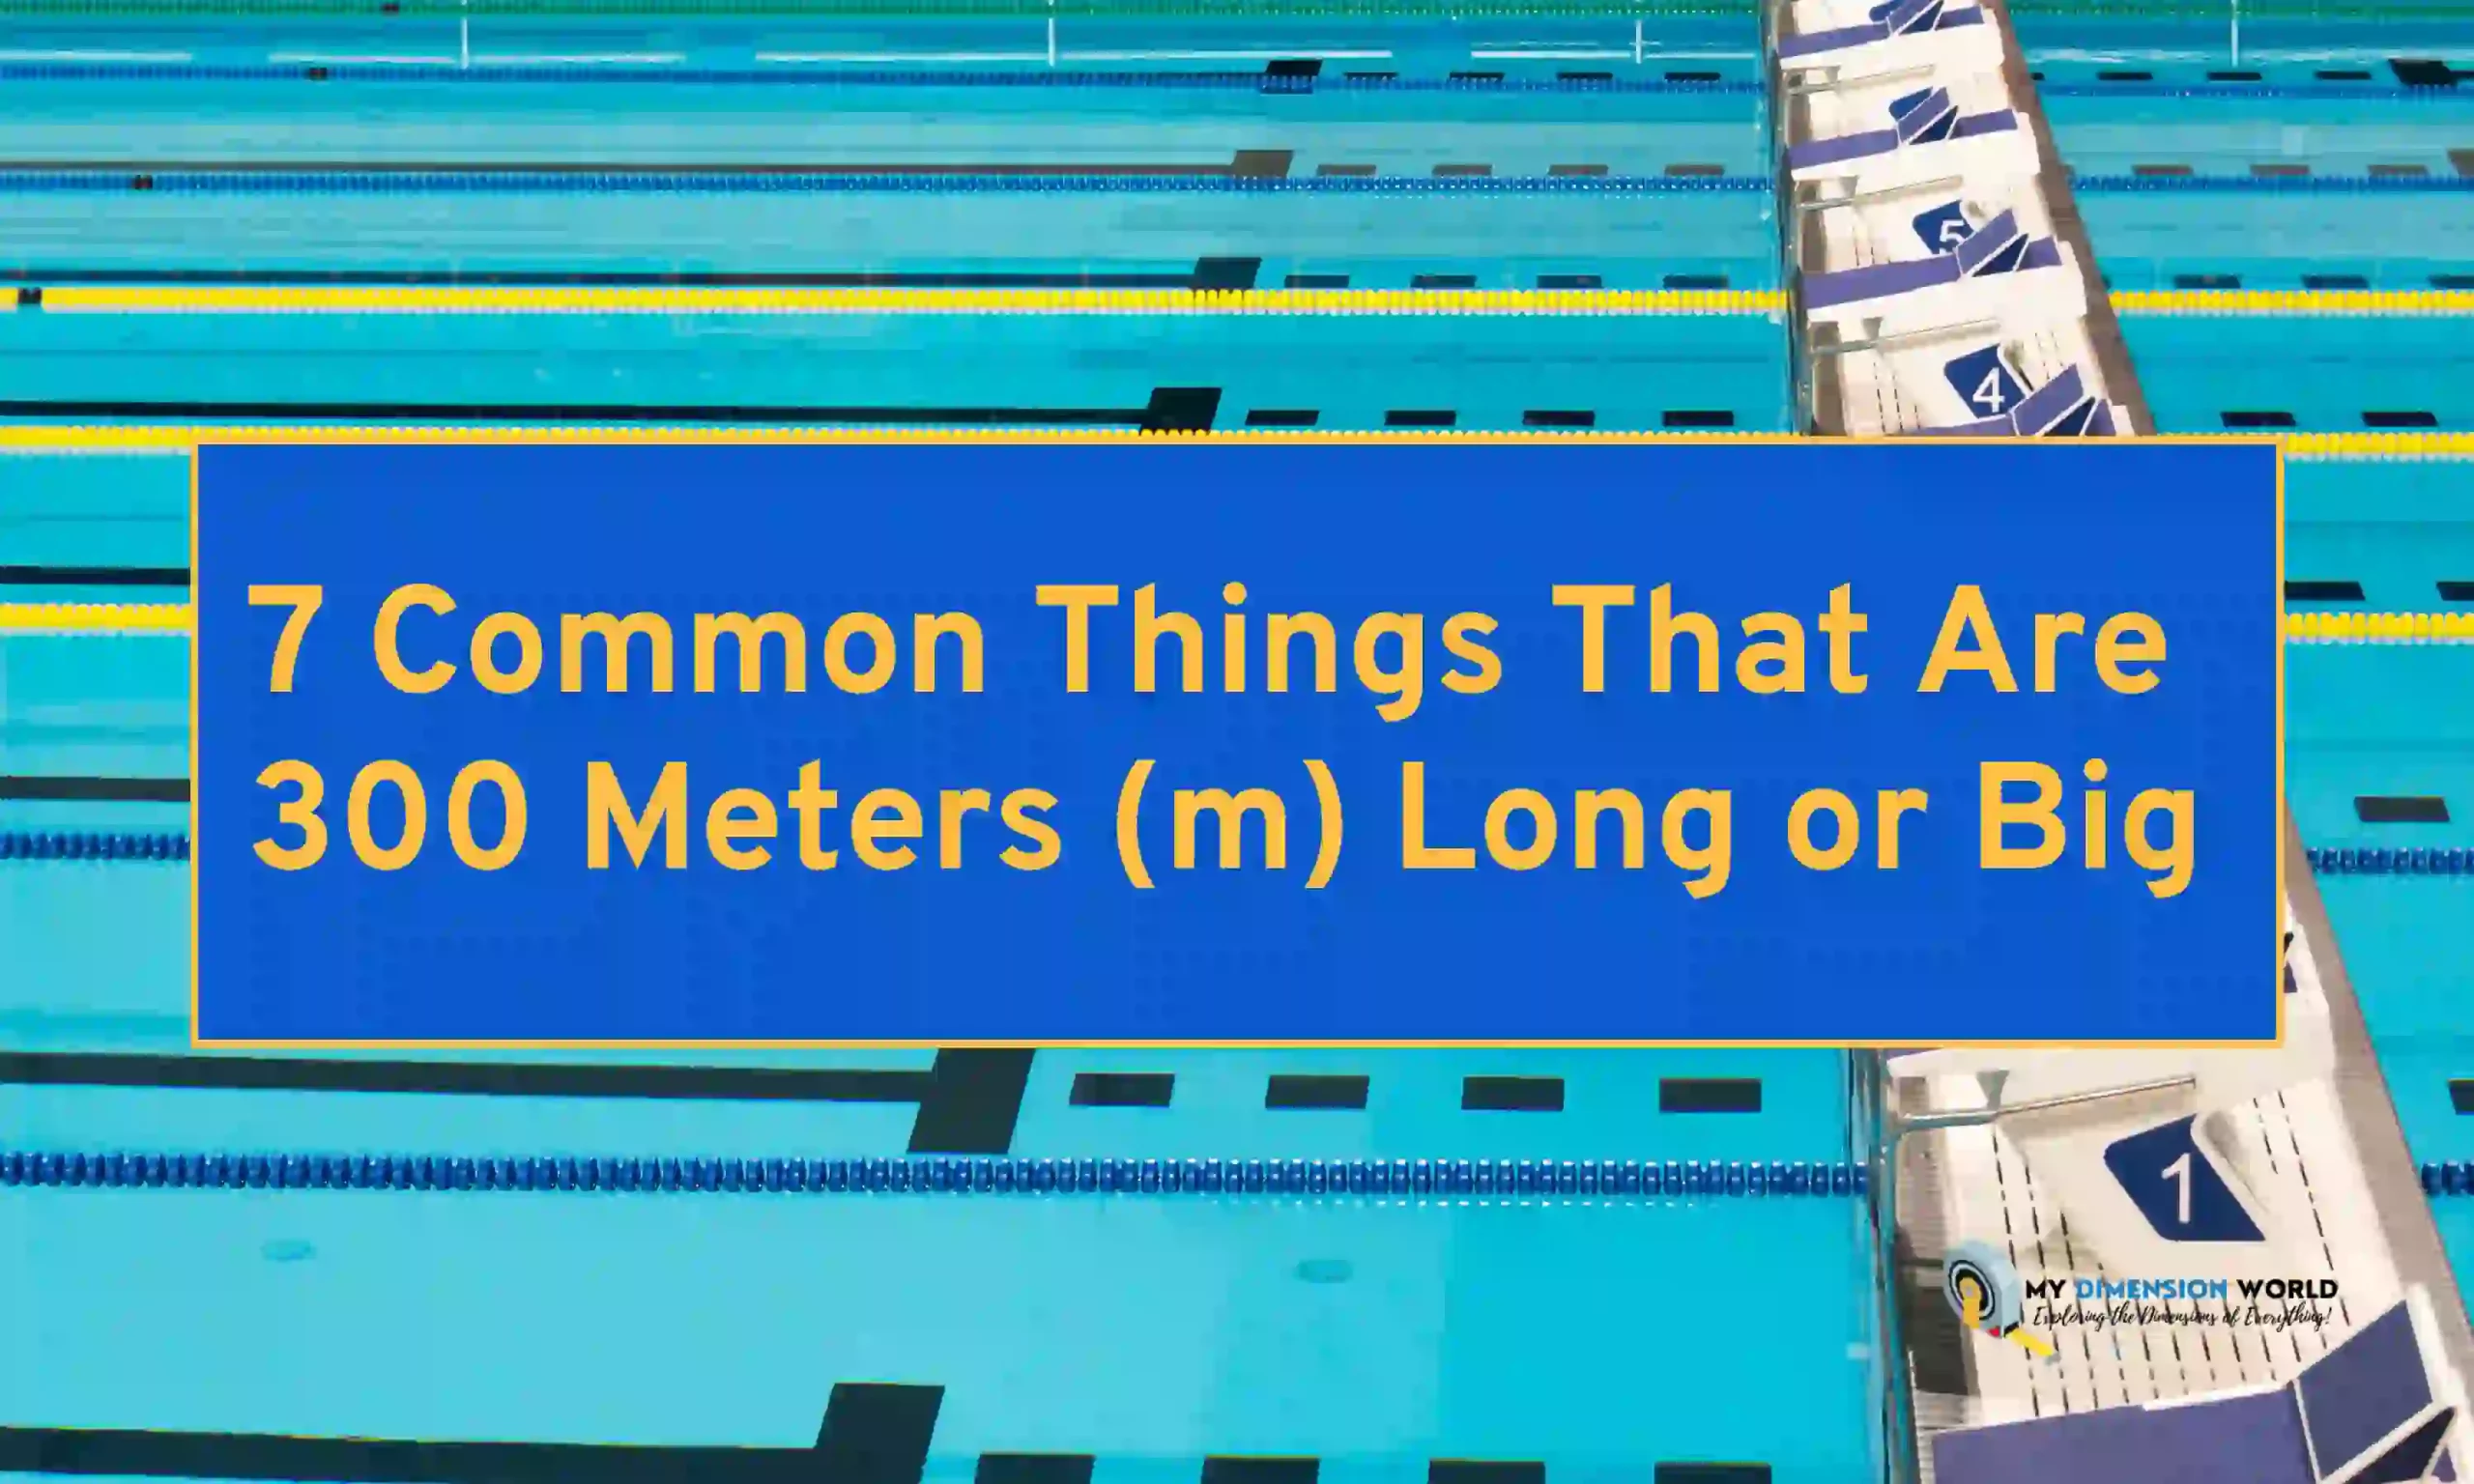 7 Common Things That Are 300 Meters (m) Long or Big